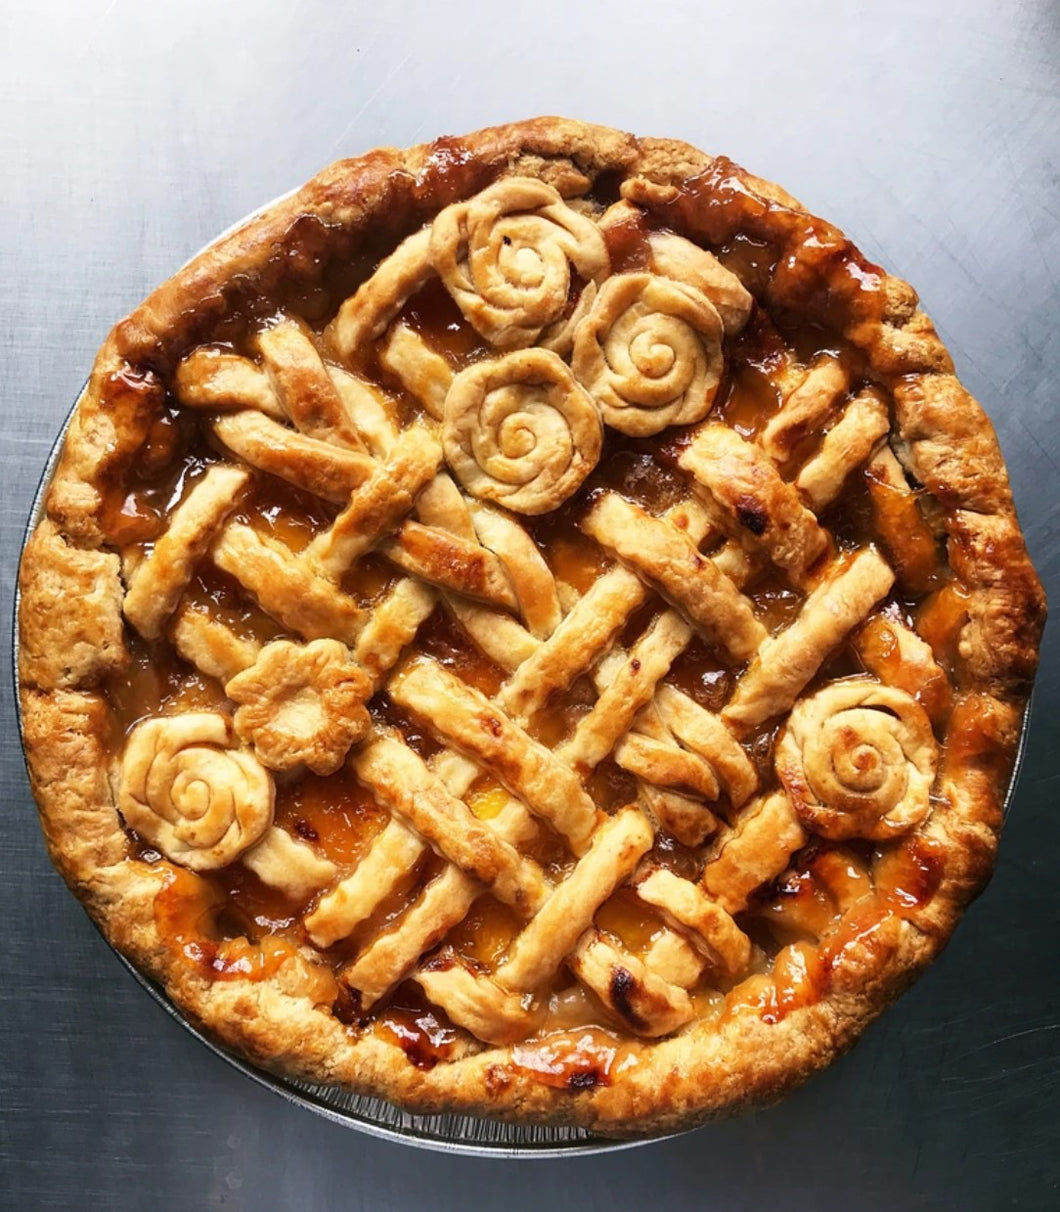 gorgeous salted caramel apple pie with lattice and flower cut out crust